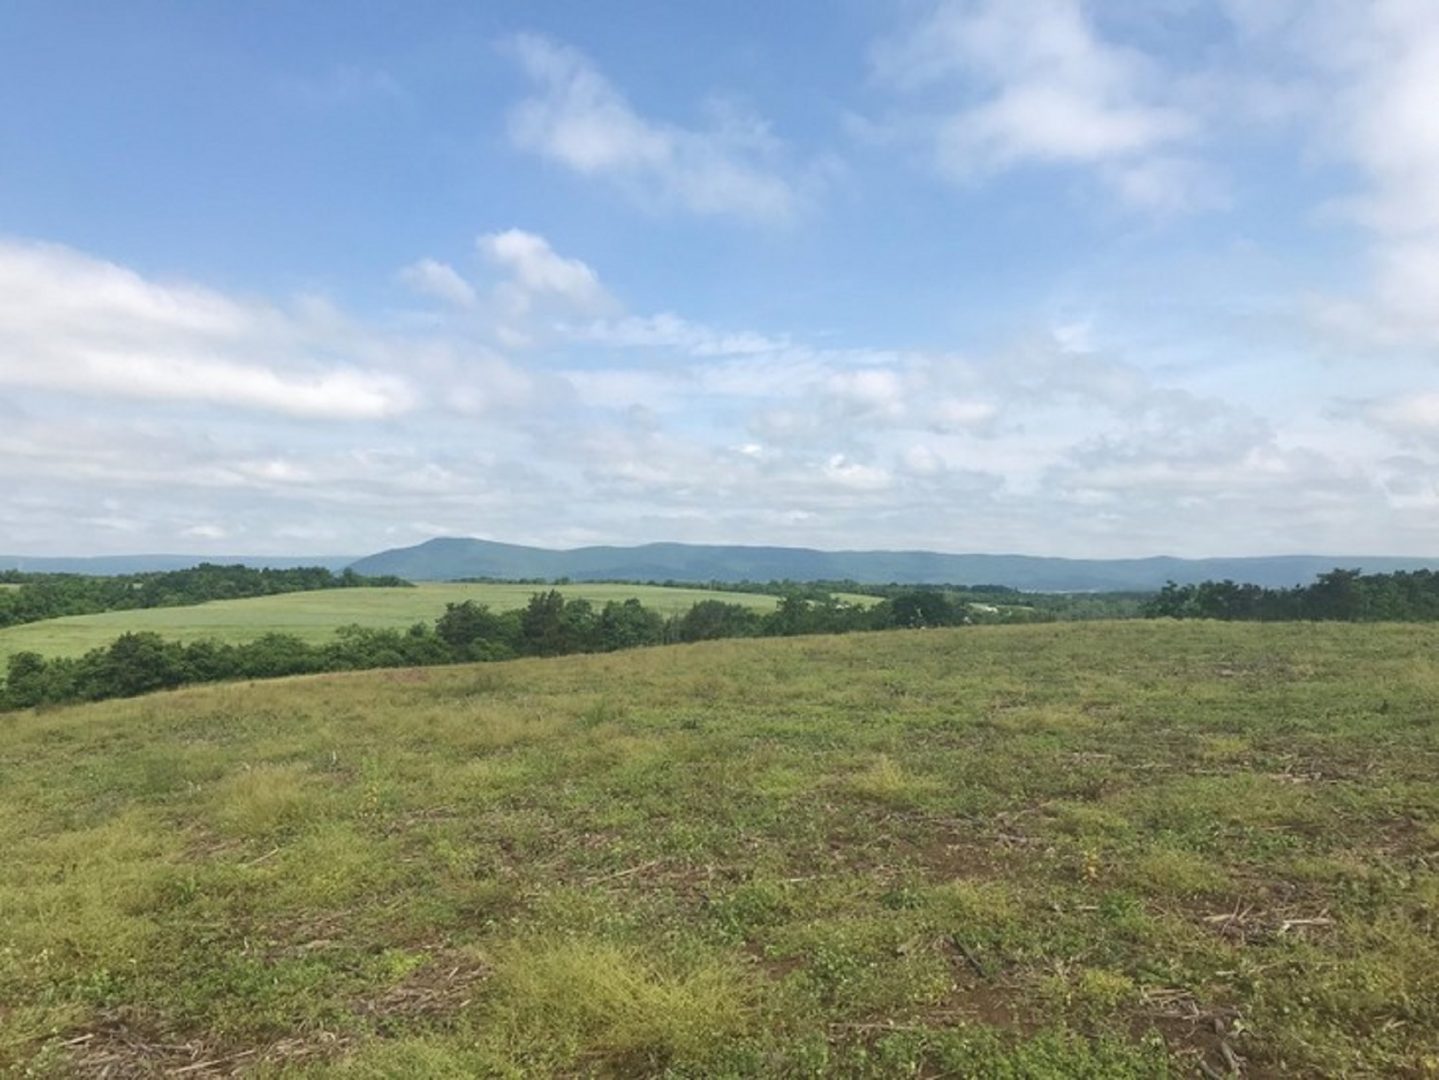 The new Penn State solar project, a large-scale, ground-mounted solar array using over 150,000 solar panels in three locations encompassing roughly 500 acres of Franklin County land, will be located just outside of Chambersburg, near Penn State’s Mont Alto campus.